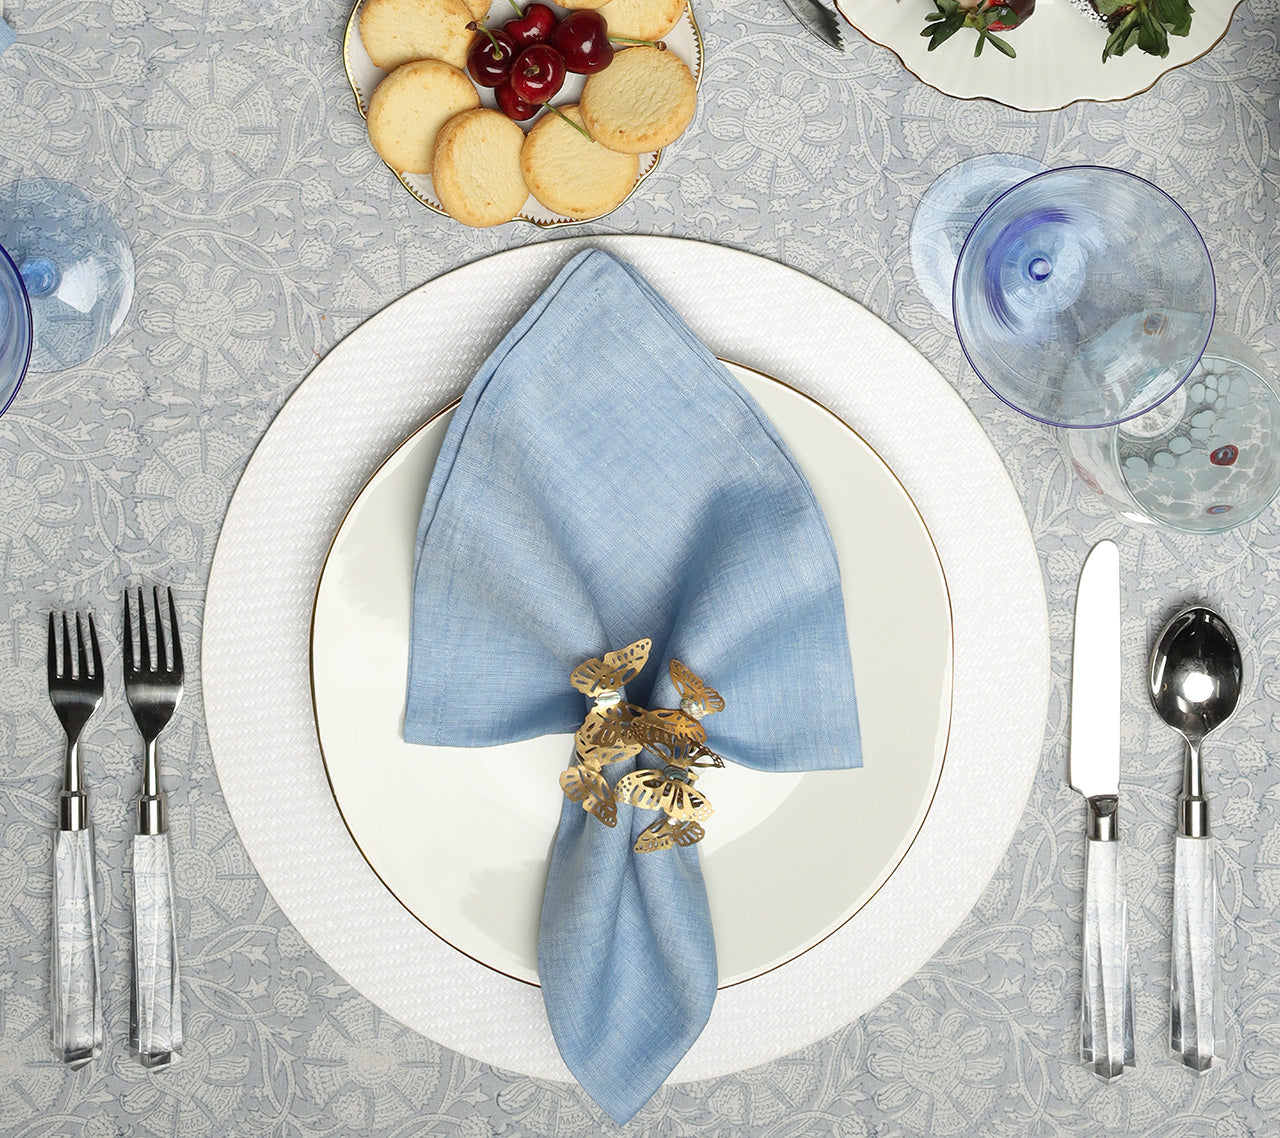 Provence Tablecloth in Periwinkle